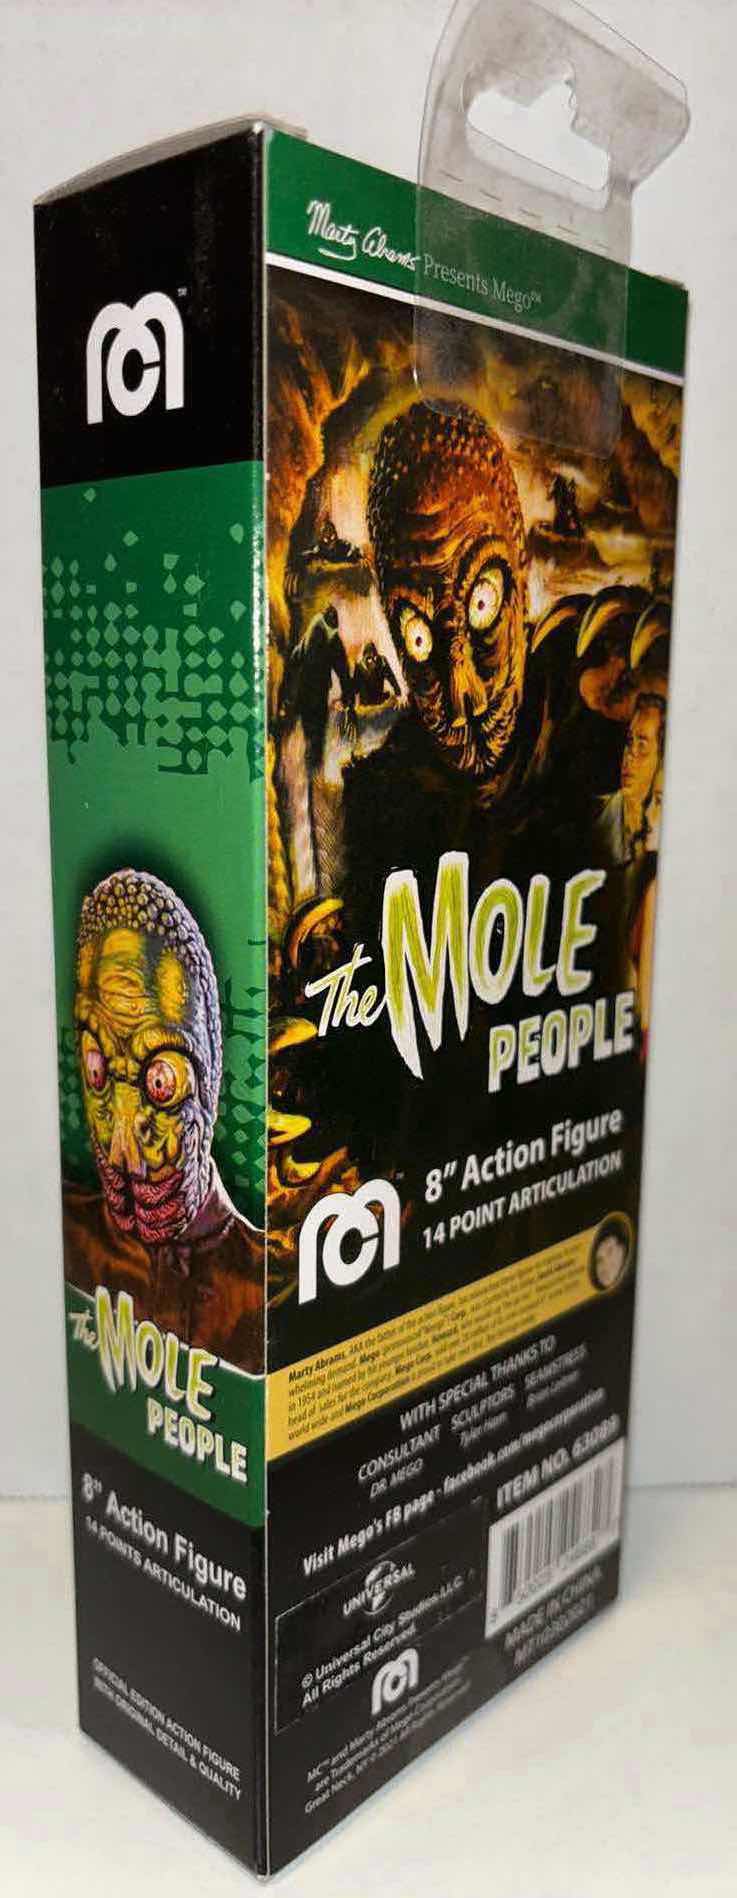 Photo 3 of BRAND NEW MEGO 8” ACTION FIGURE, “THE MOLE PEOPLE”